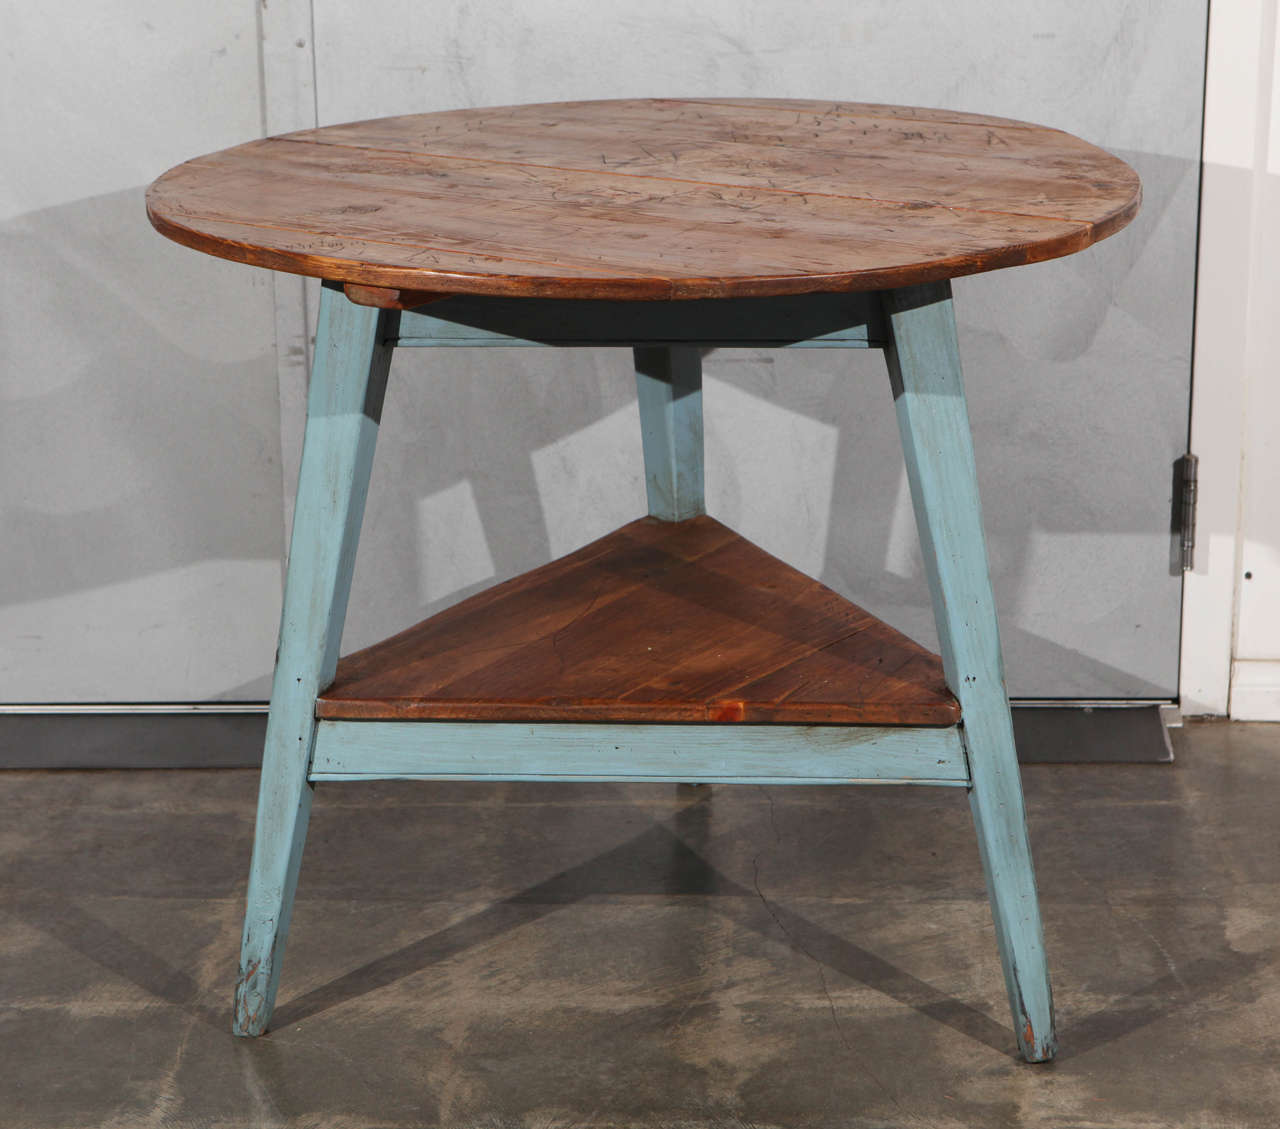 This interesting cricket table is a reconstructed piece we believe was made in England in the 1980s with an older aged wood table top and newer pine legs and triangular shelf. The blue painted legs give this piece a unique versatility for a variety